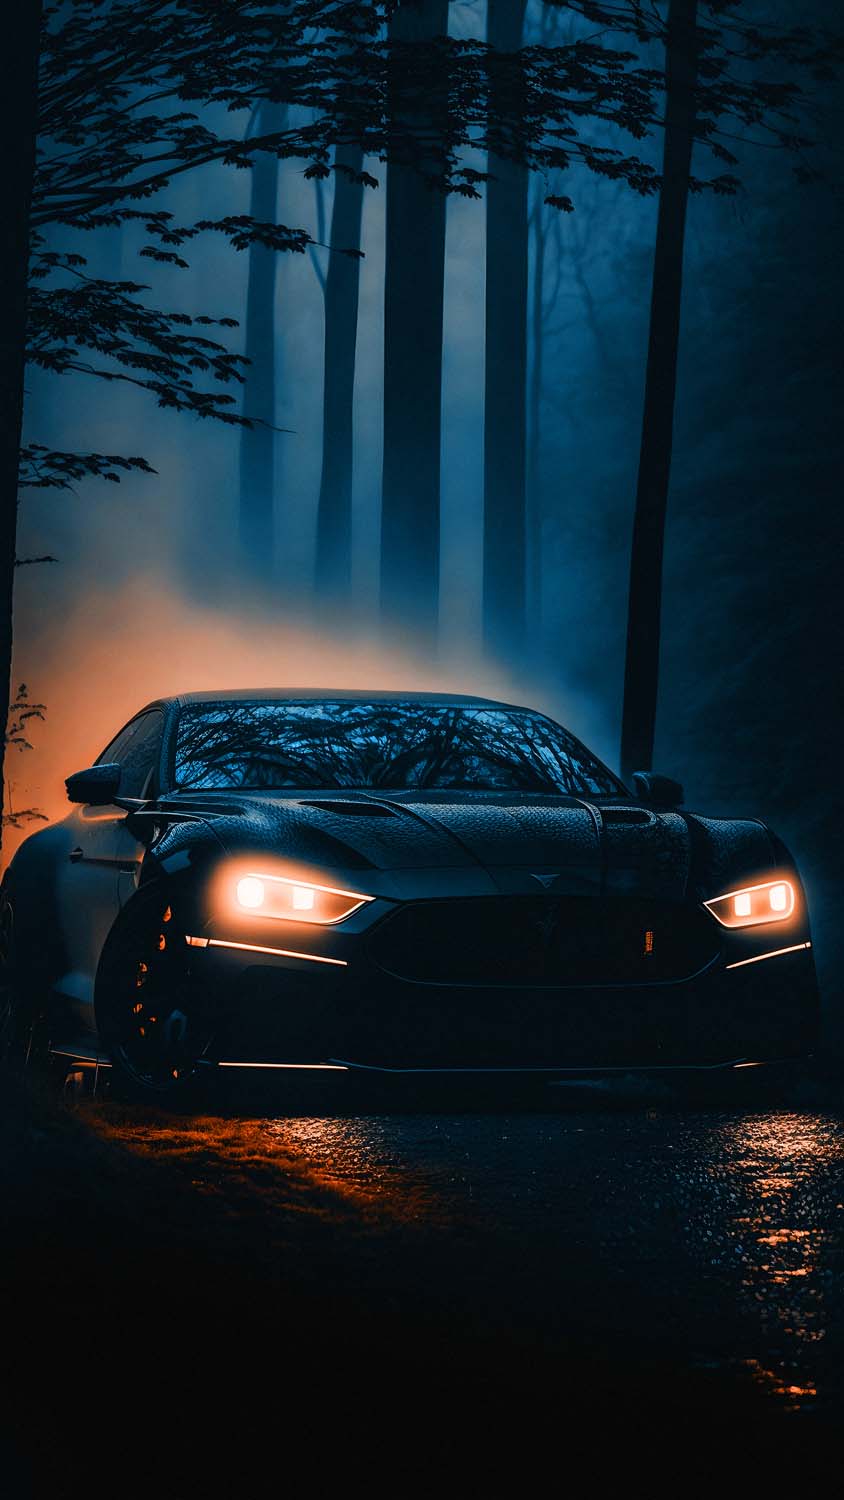 50+ Cars Wallpaper HD 1080p Free Download for Android Mobile - WallpaperDP  | Wallpaper DP